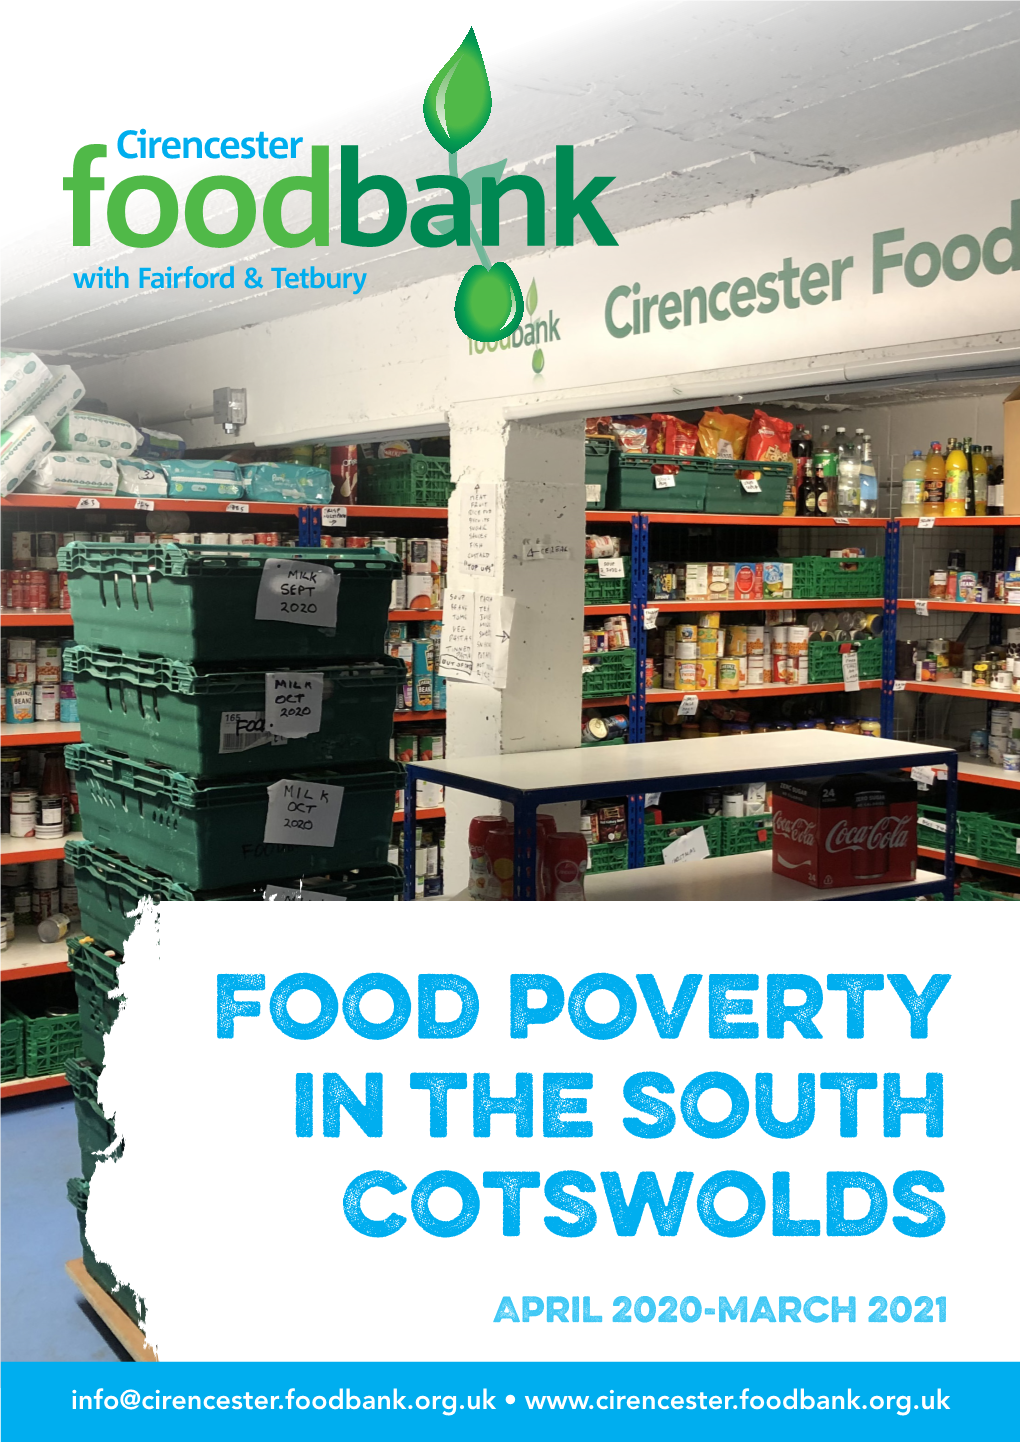 Food Poverty in the South Cotswolds